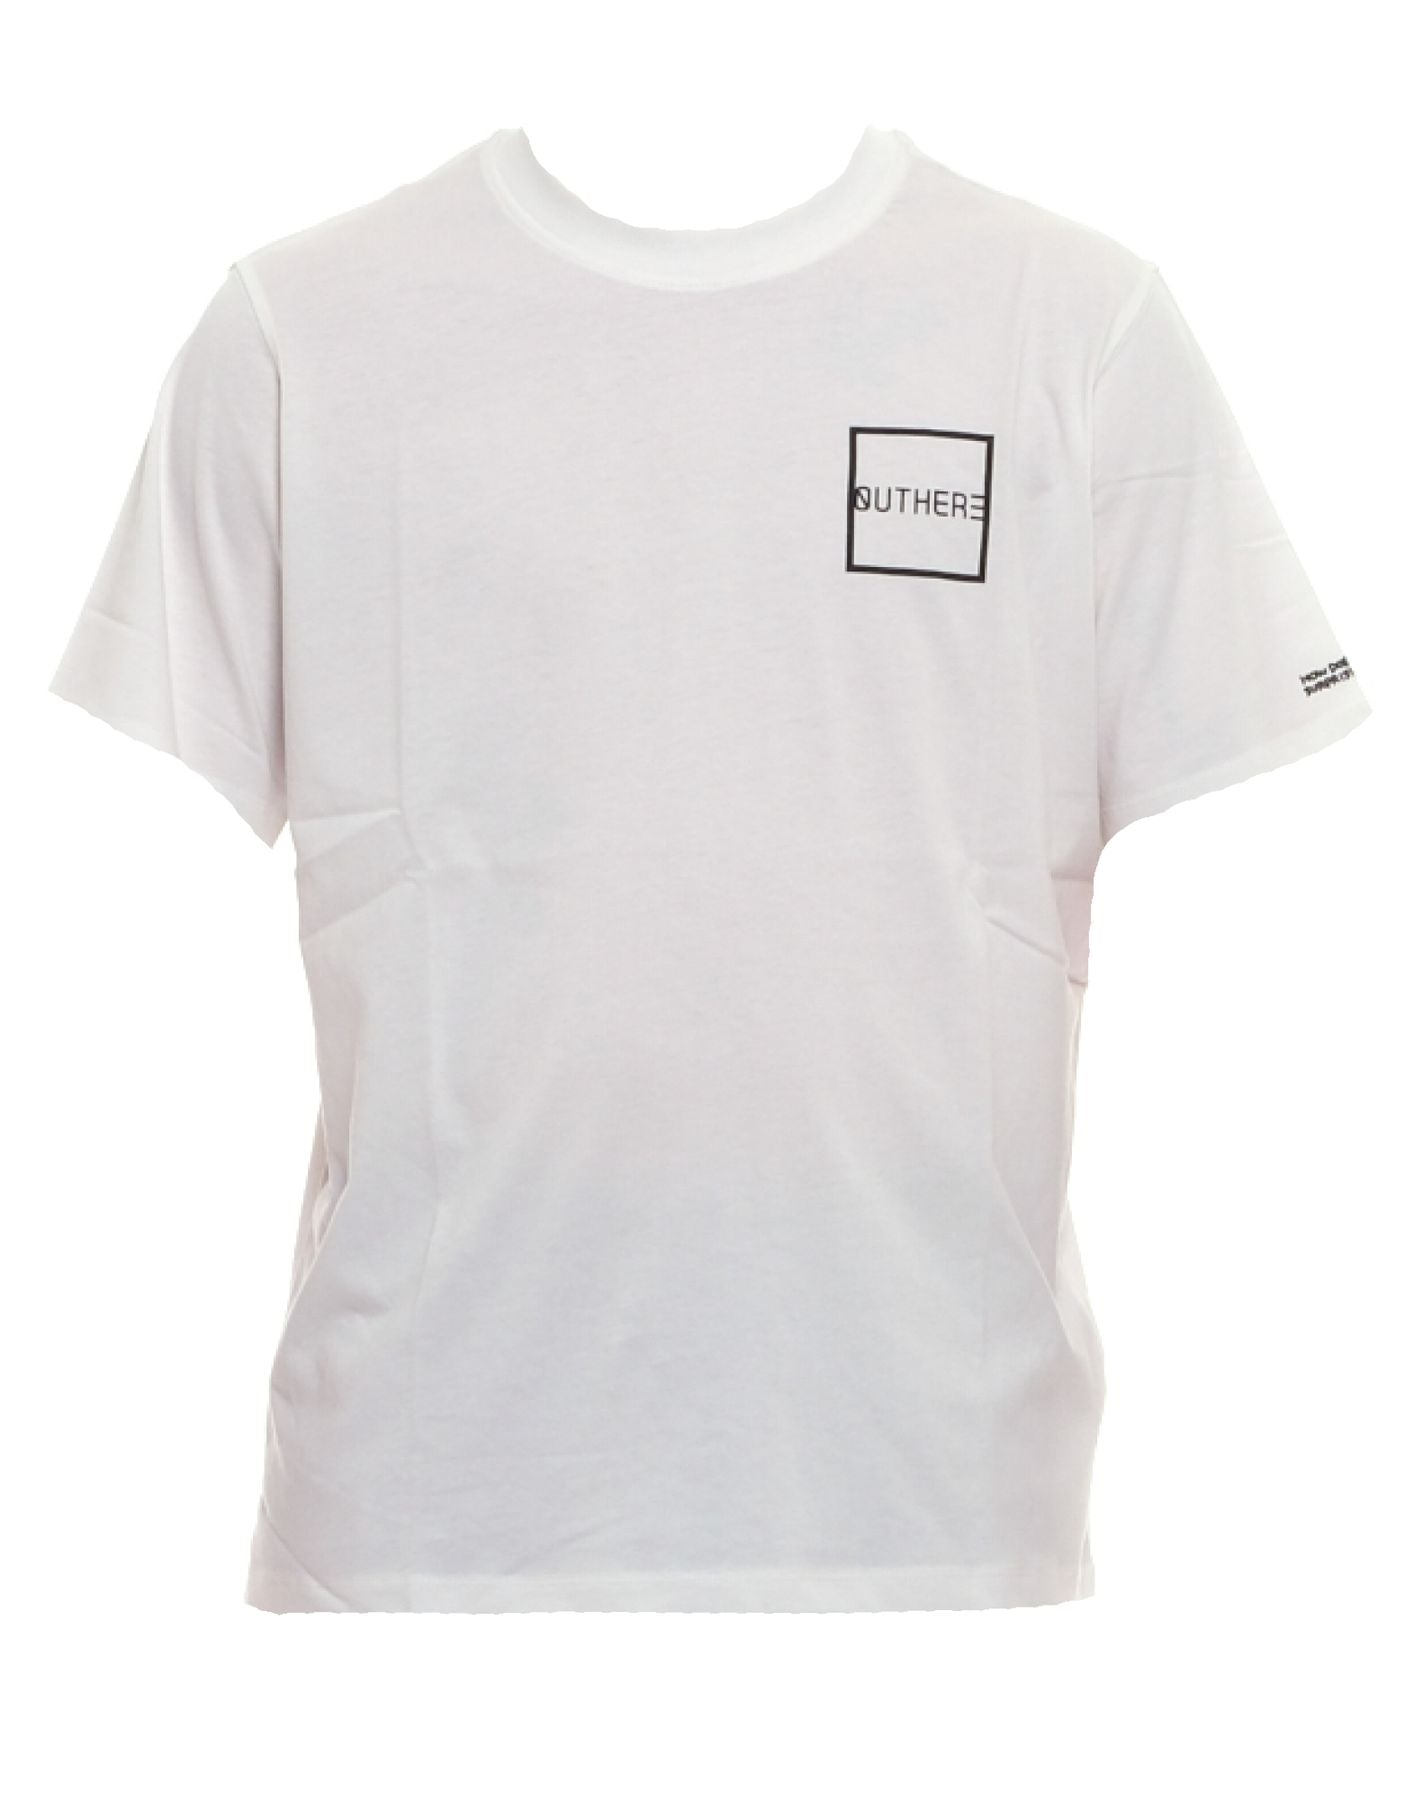 T-shirt man eotm136ag95 blanc out there